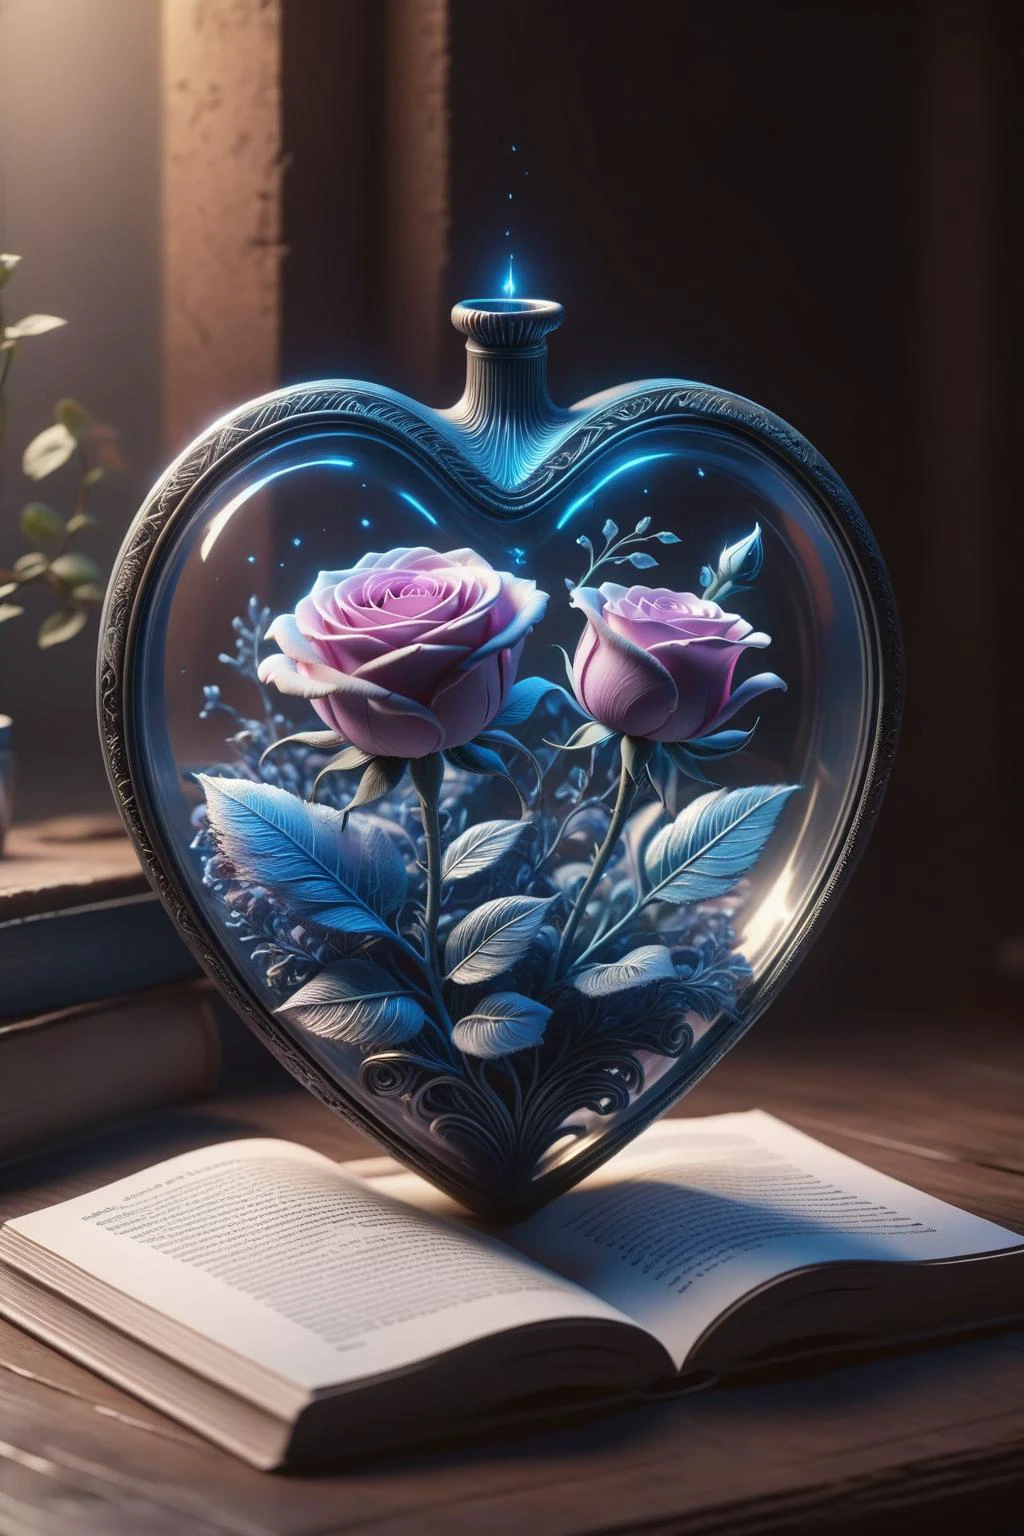 Digital Art,Concept Art,octane rendering,unreal engine,dreamlike scenes,delicate and rich light and color,superb light and shadow effects and color matching,aesthetic and romantic,Surrealistic,magical,fantasist,fantastic,Ornate And Intricate,unimaginable beauty,
A glowing [pink|purple] rose and some glowing blue plants in a transparent (heart-shaped:1.5) glass container,
this container in a love story book,extremely romantic mood,nostalgic atmosphere,gentle light and lingering composition,depth of field,letitflrsh,ral-3dwvz,